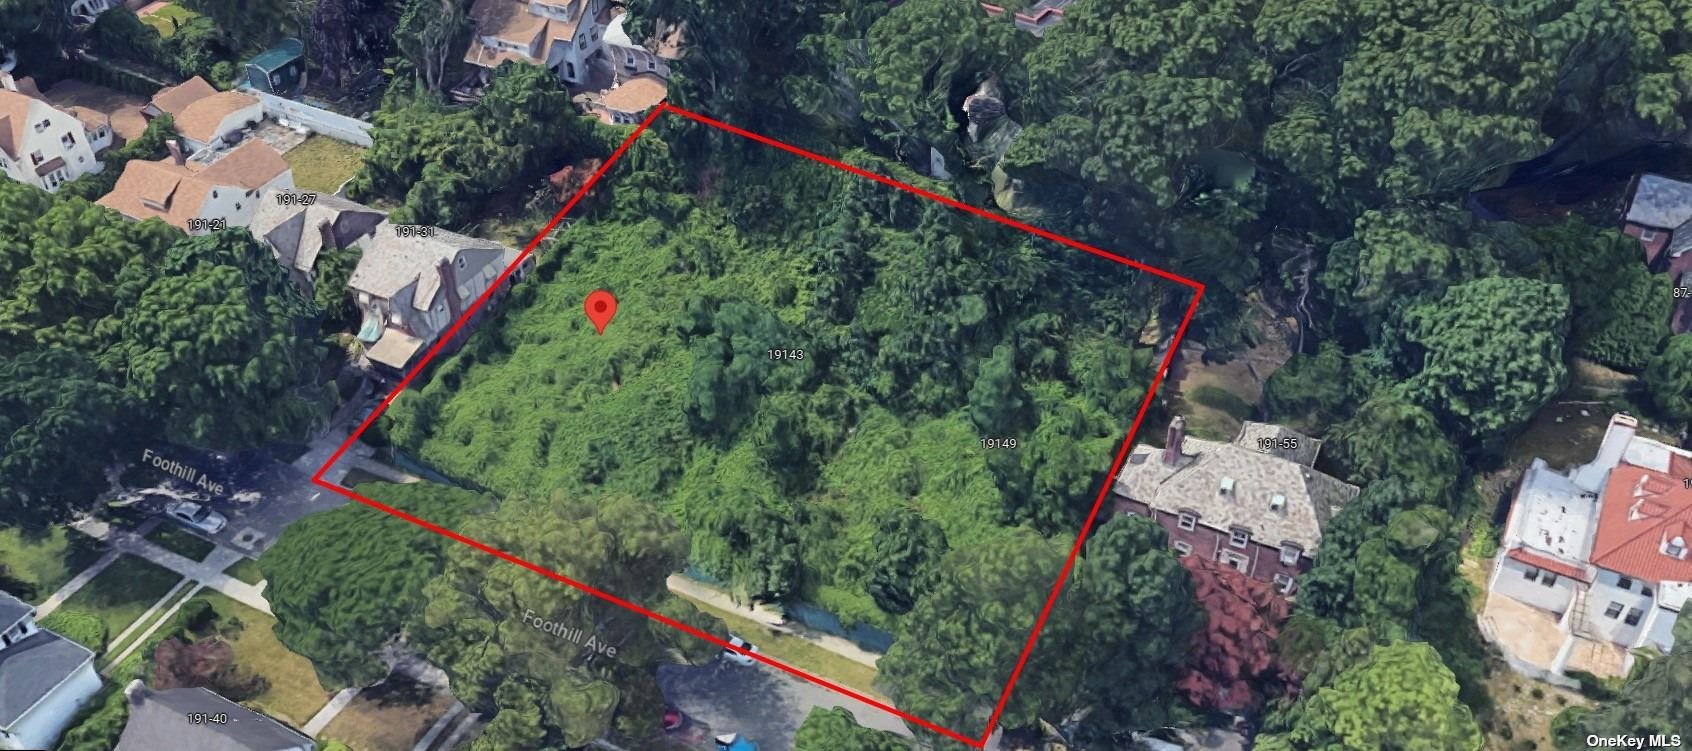 Land in Hollis - Foothill  Queens, NY 11423